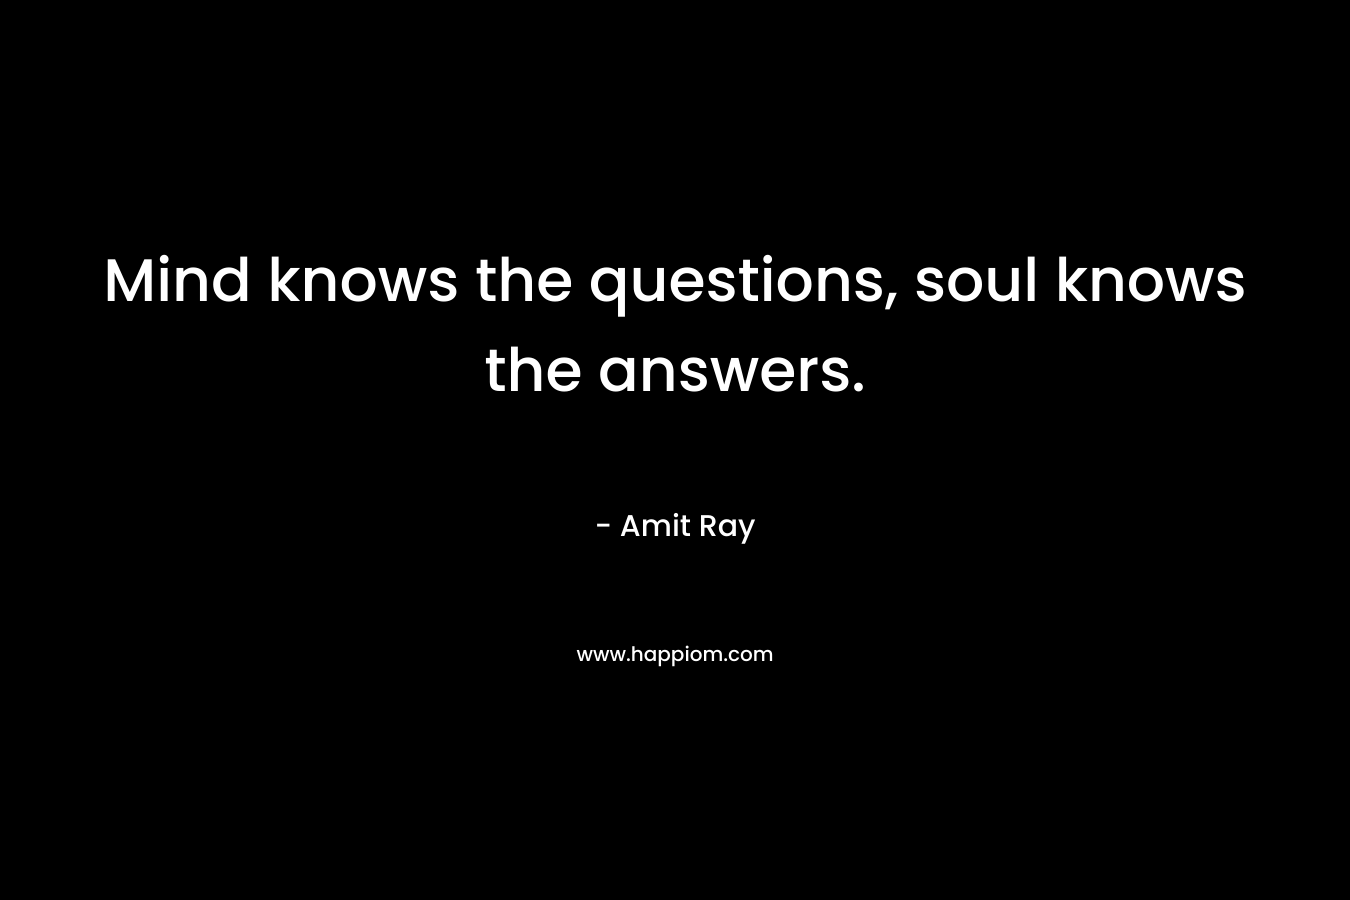 Mind knows the questions, soul knows the answers.